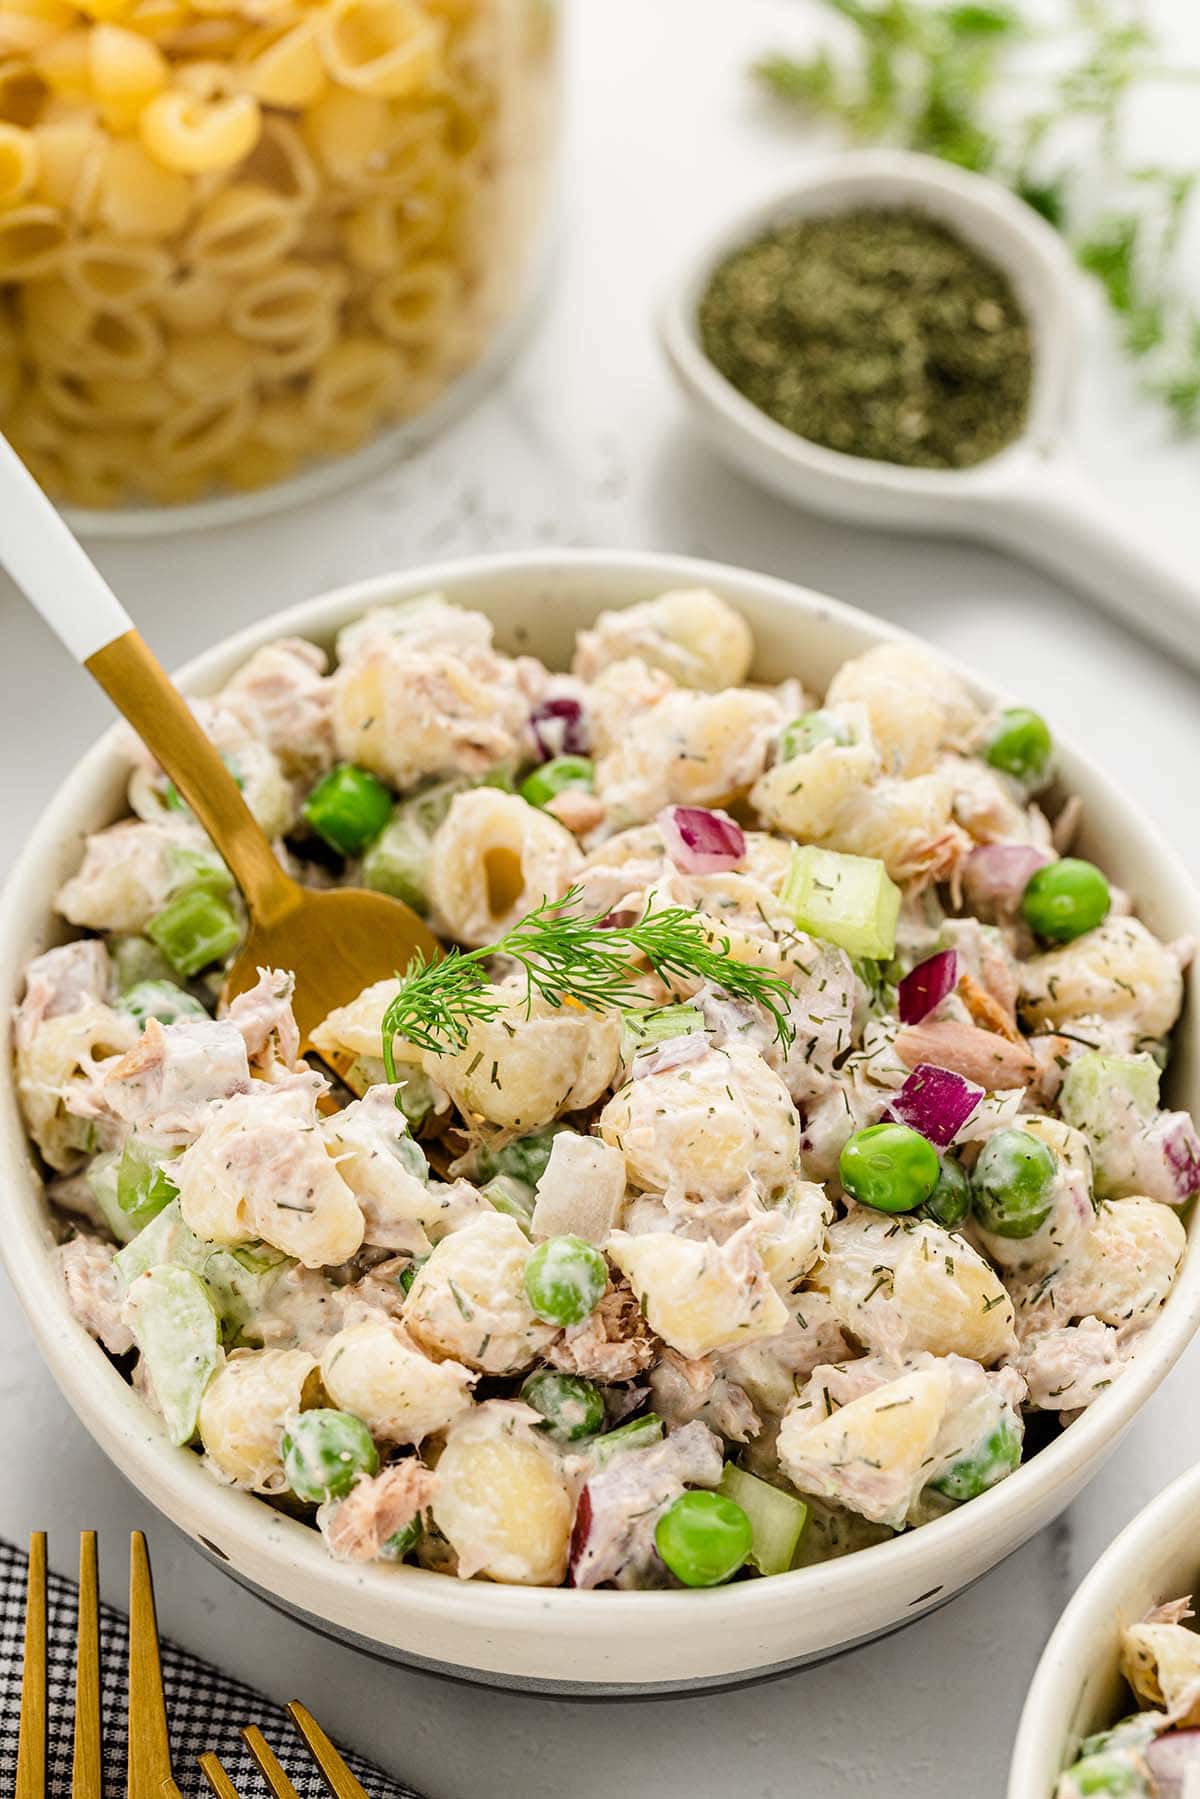 Tuna Pasta Salad with dried dill served in a white bowl.